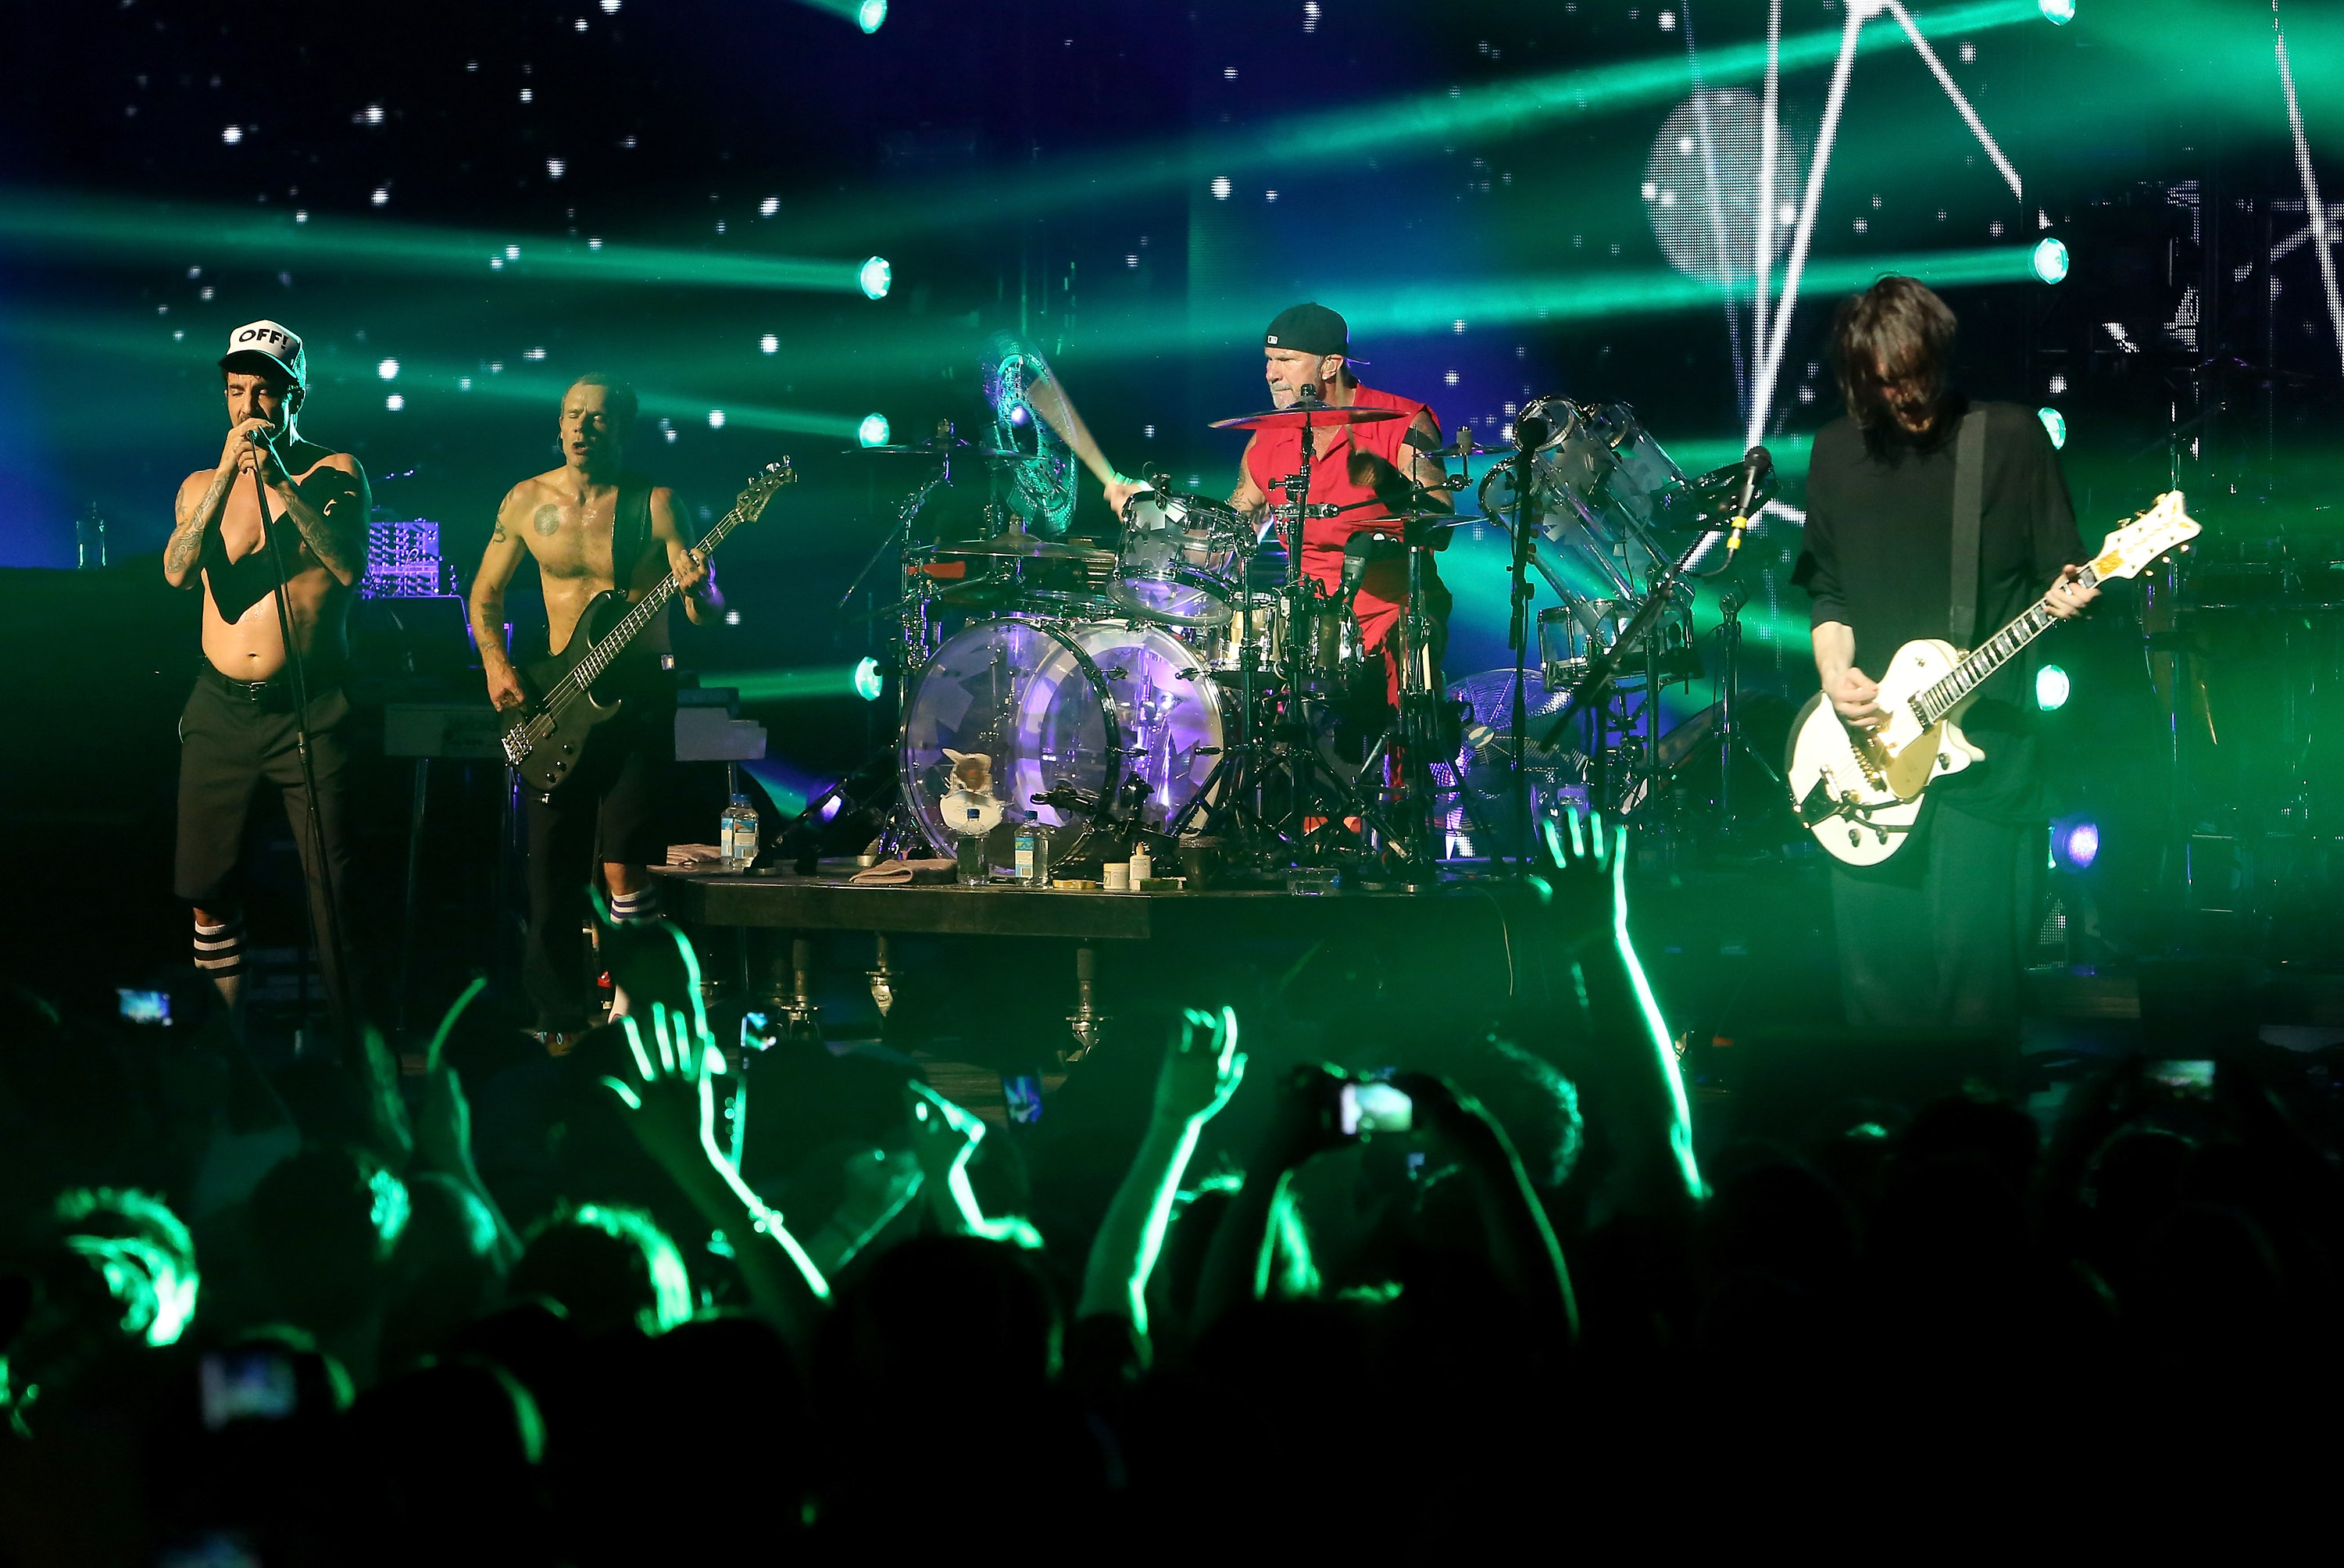 of The Red Hot Chili Peppers perform on New Year's Eve at The Cosmopolitan of Las Vegas on December 31, 2012 in Las Vegas, Nevada.